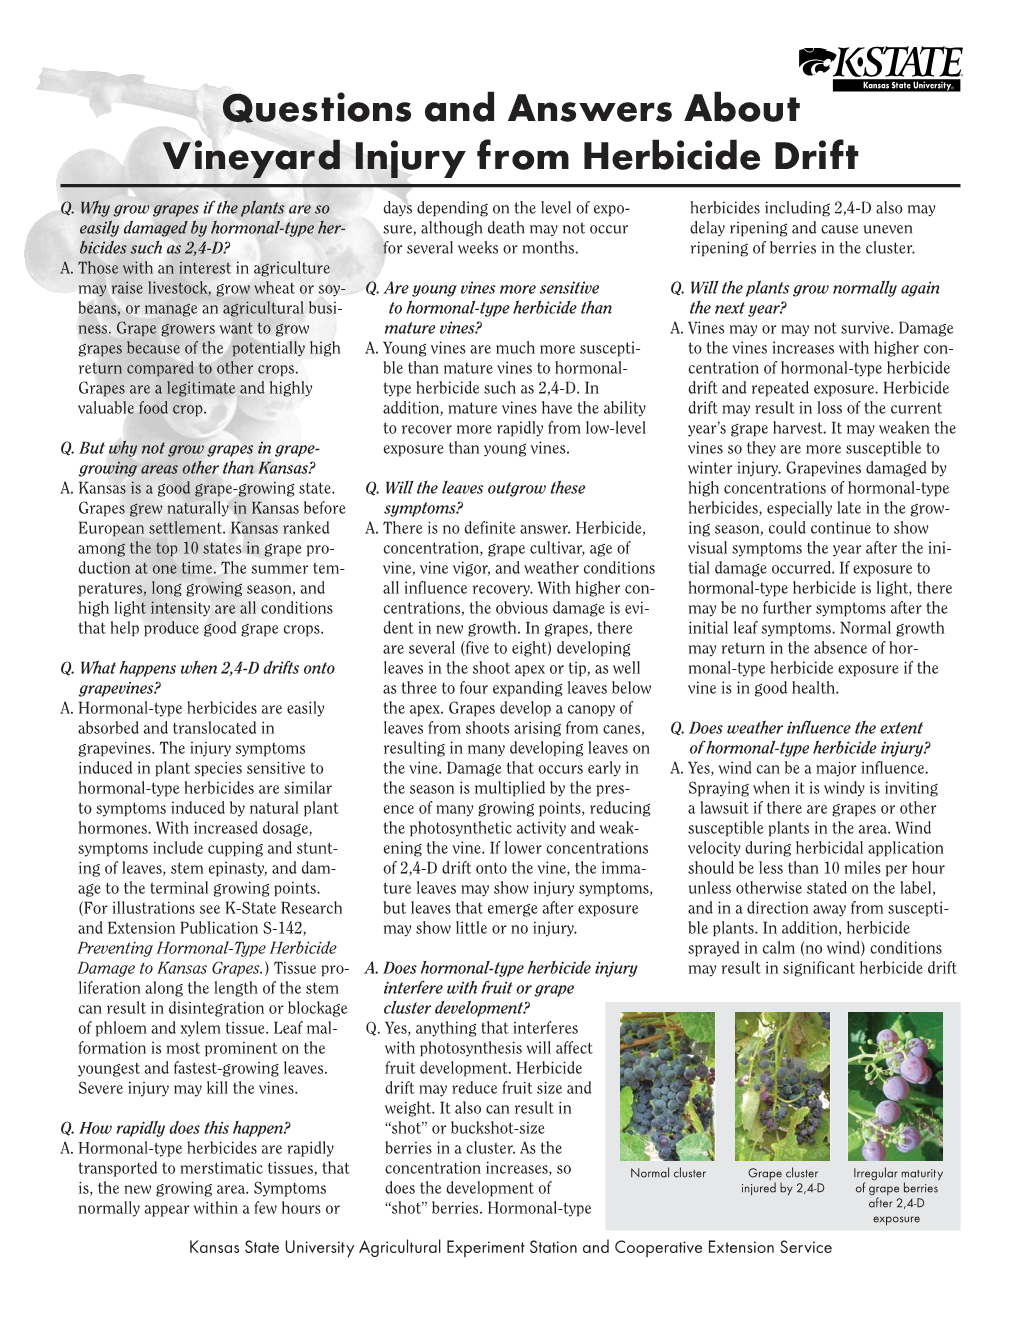 MF2588 Questions and Answers About Vineyard Injury From